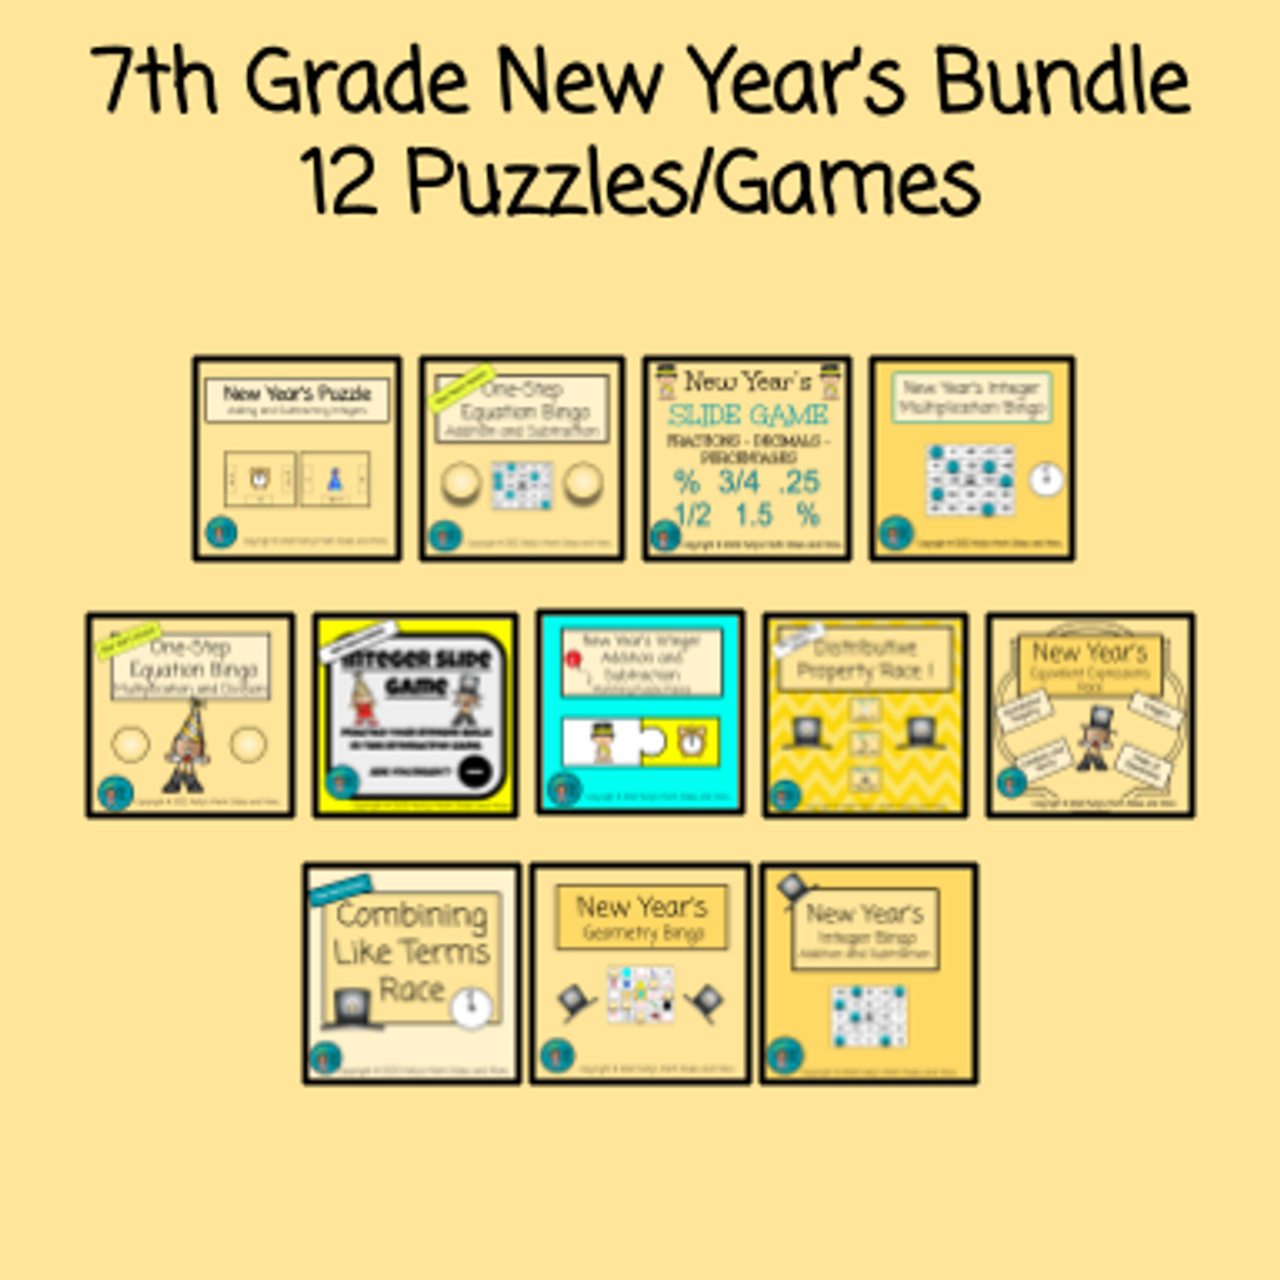 7th Grade New Year's Bundle of 12 Games/Puzzles